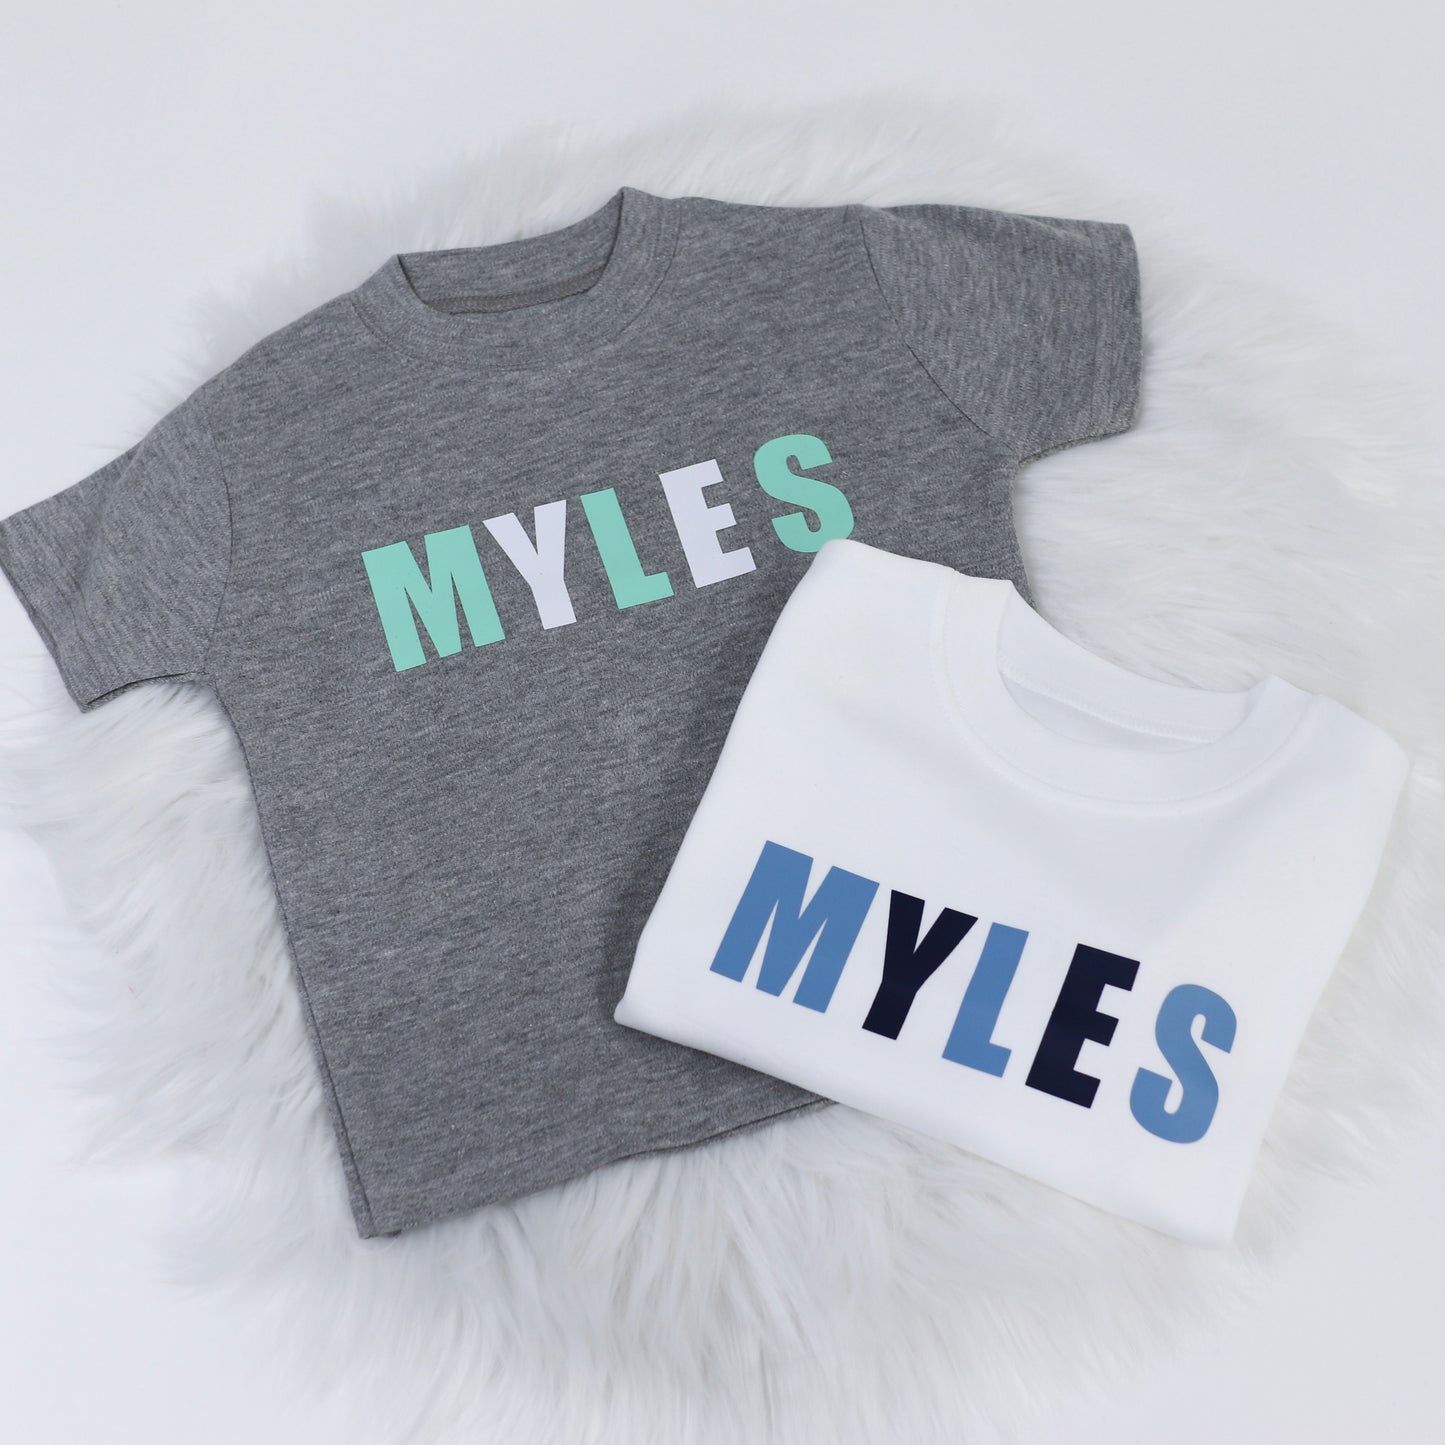 Two Colour Block Personalised T-Shirt